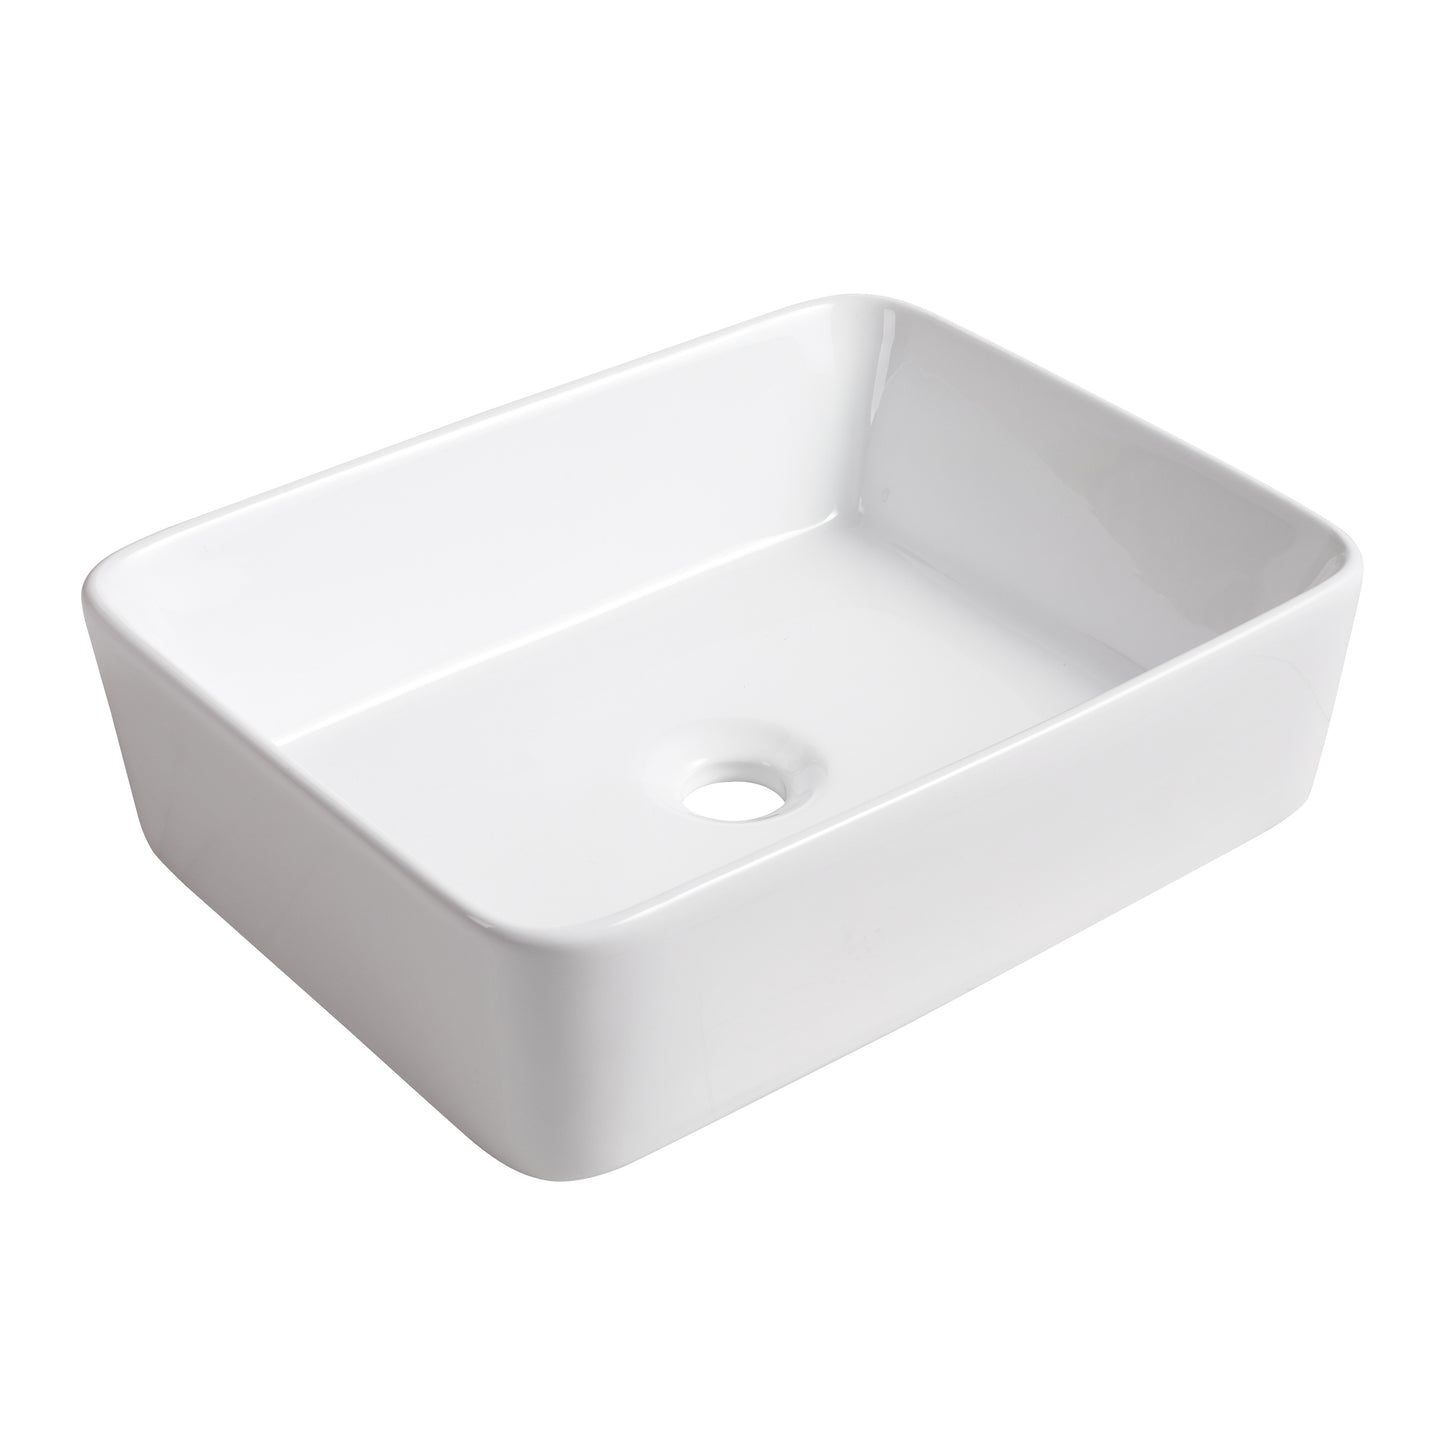 24 " Modern Design Float Bathroom Vanity With Ceramic Basin Set,  Wall Mounted White Oak Vanity  With Soft Close Door,KD-Packing，KD-Packing，2 Pieces Parcel（TOP-BAB110MOWH）